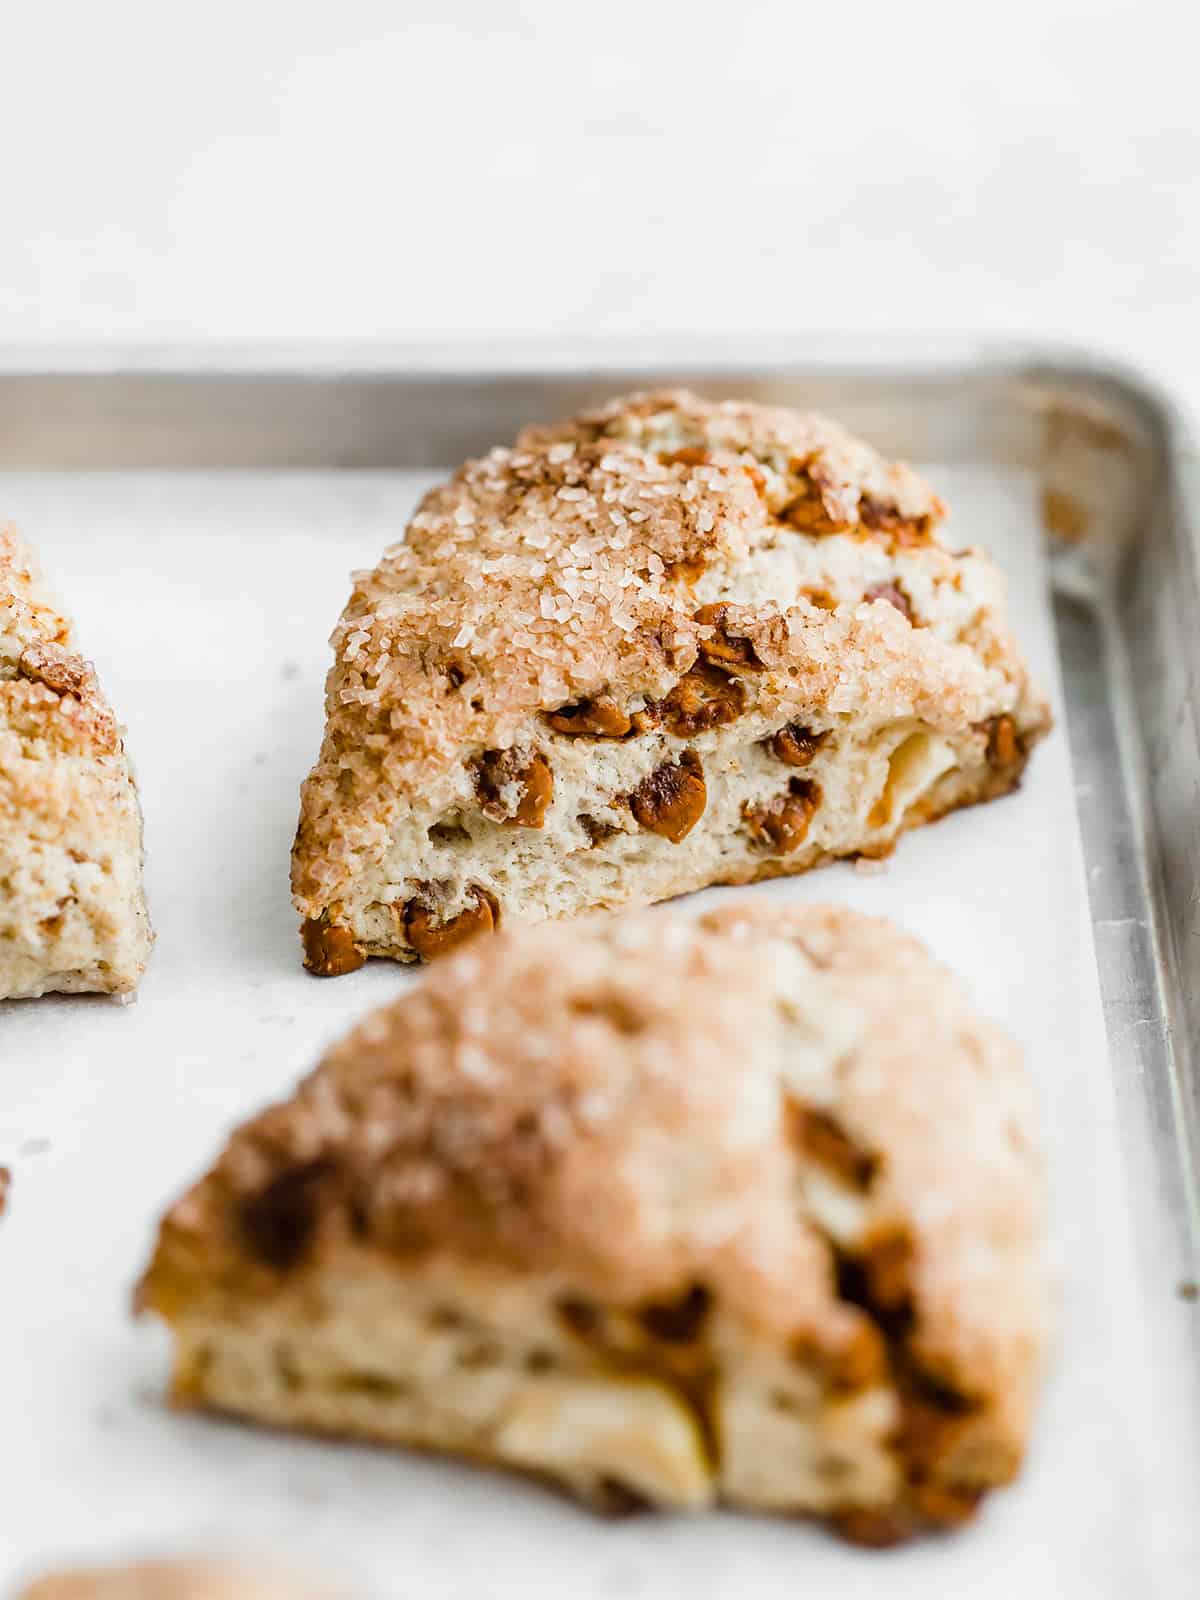 An apple cinnamon scone on a parchment lined baking sheet.